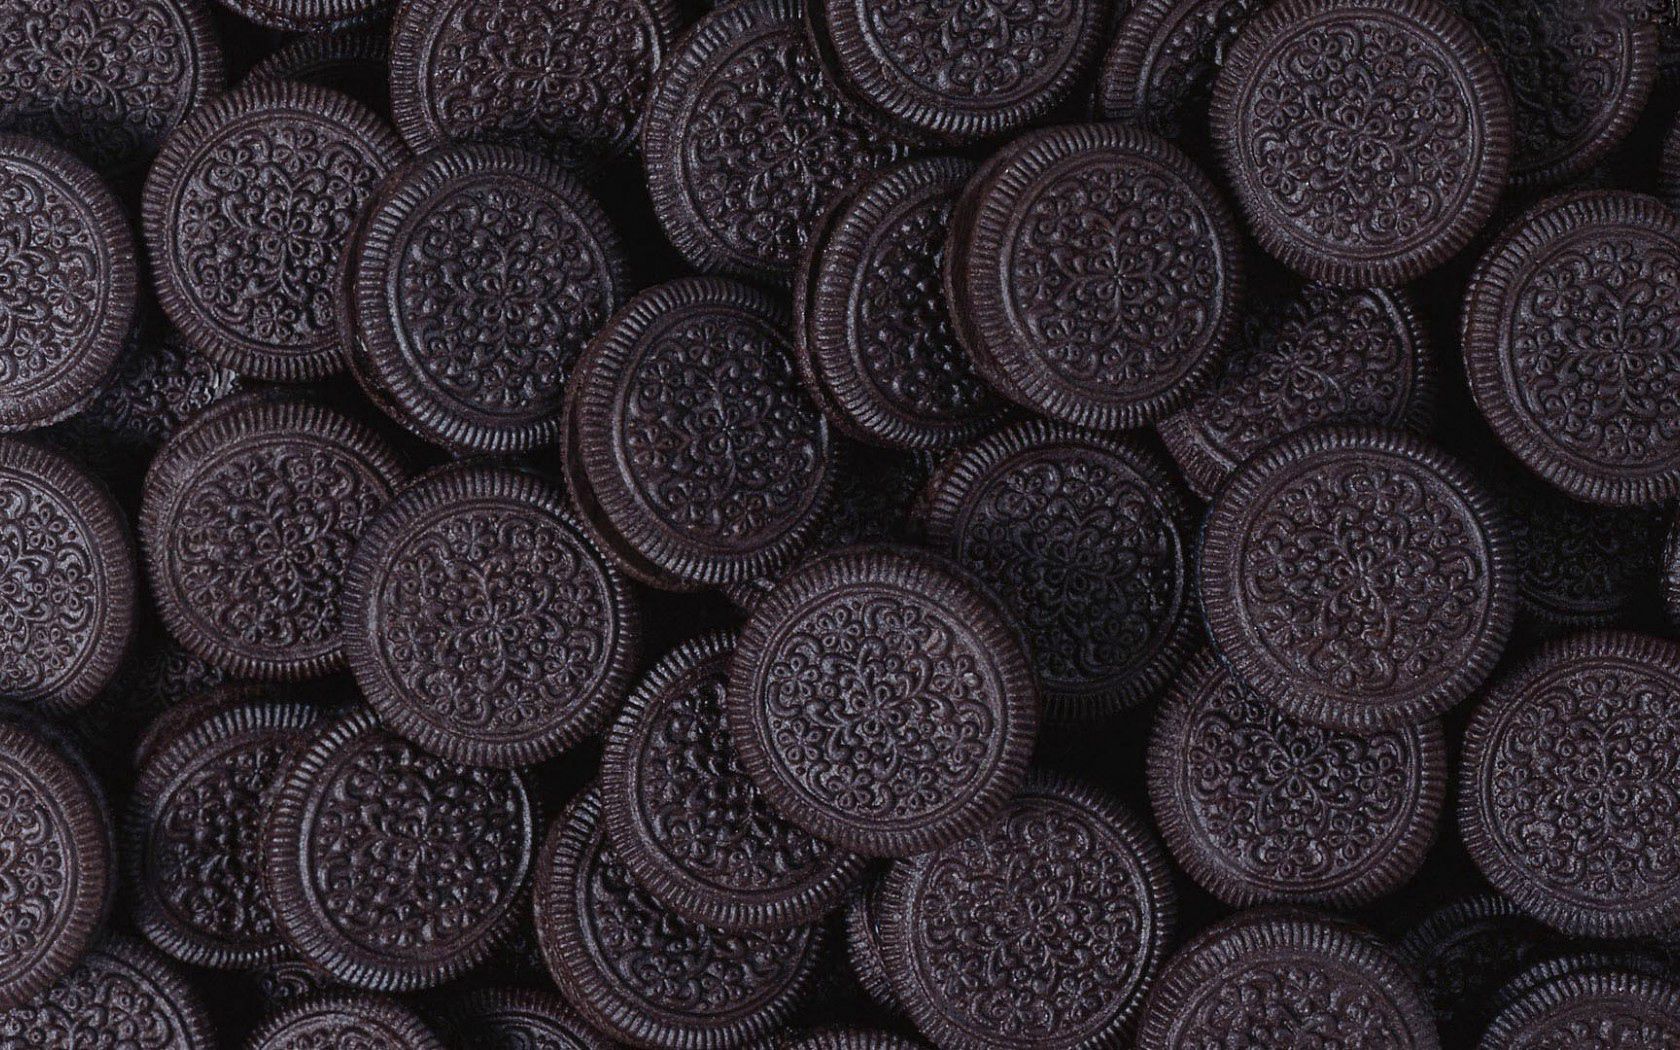 95610 download wallpaper food, desert, cookies, bakery products, baking, oreo screensavers and pictures for free